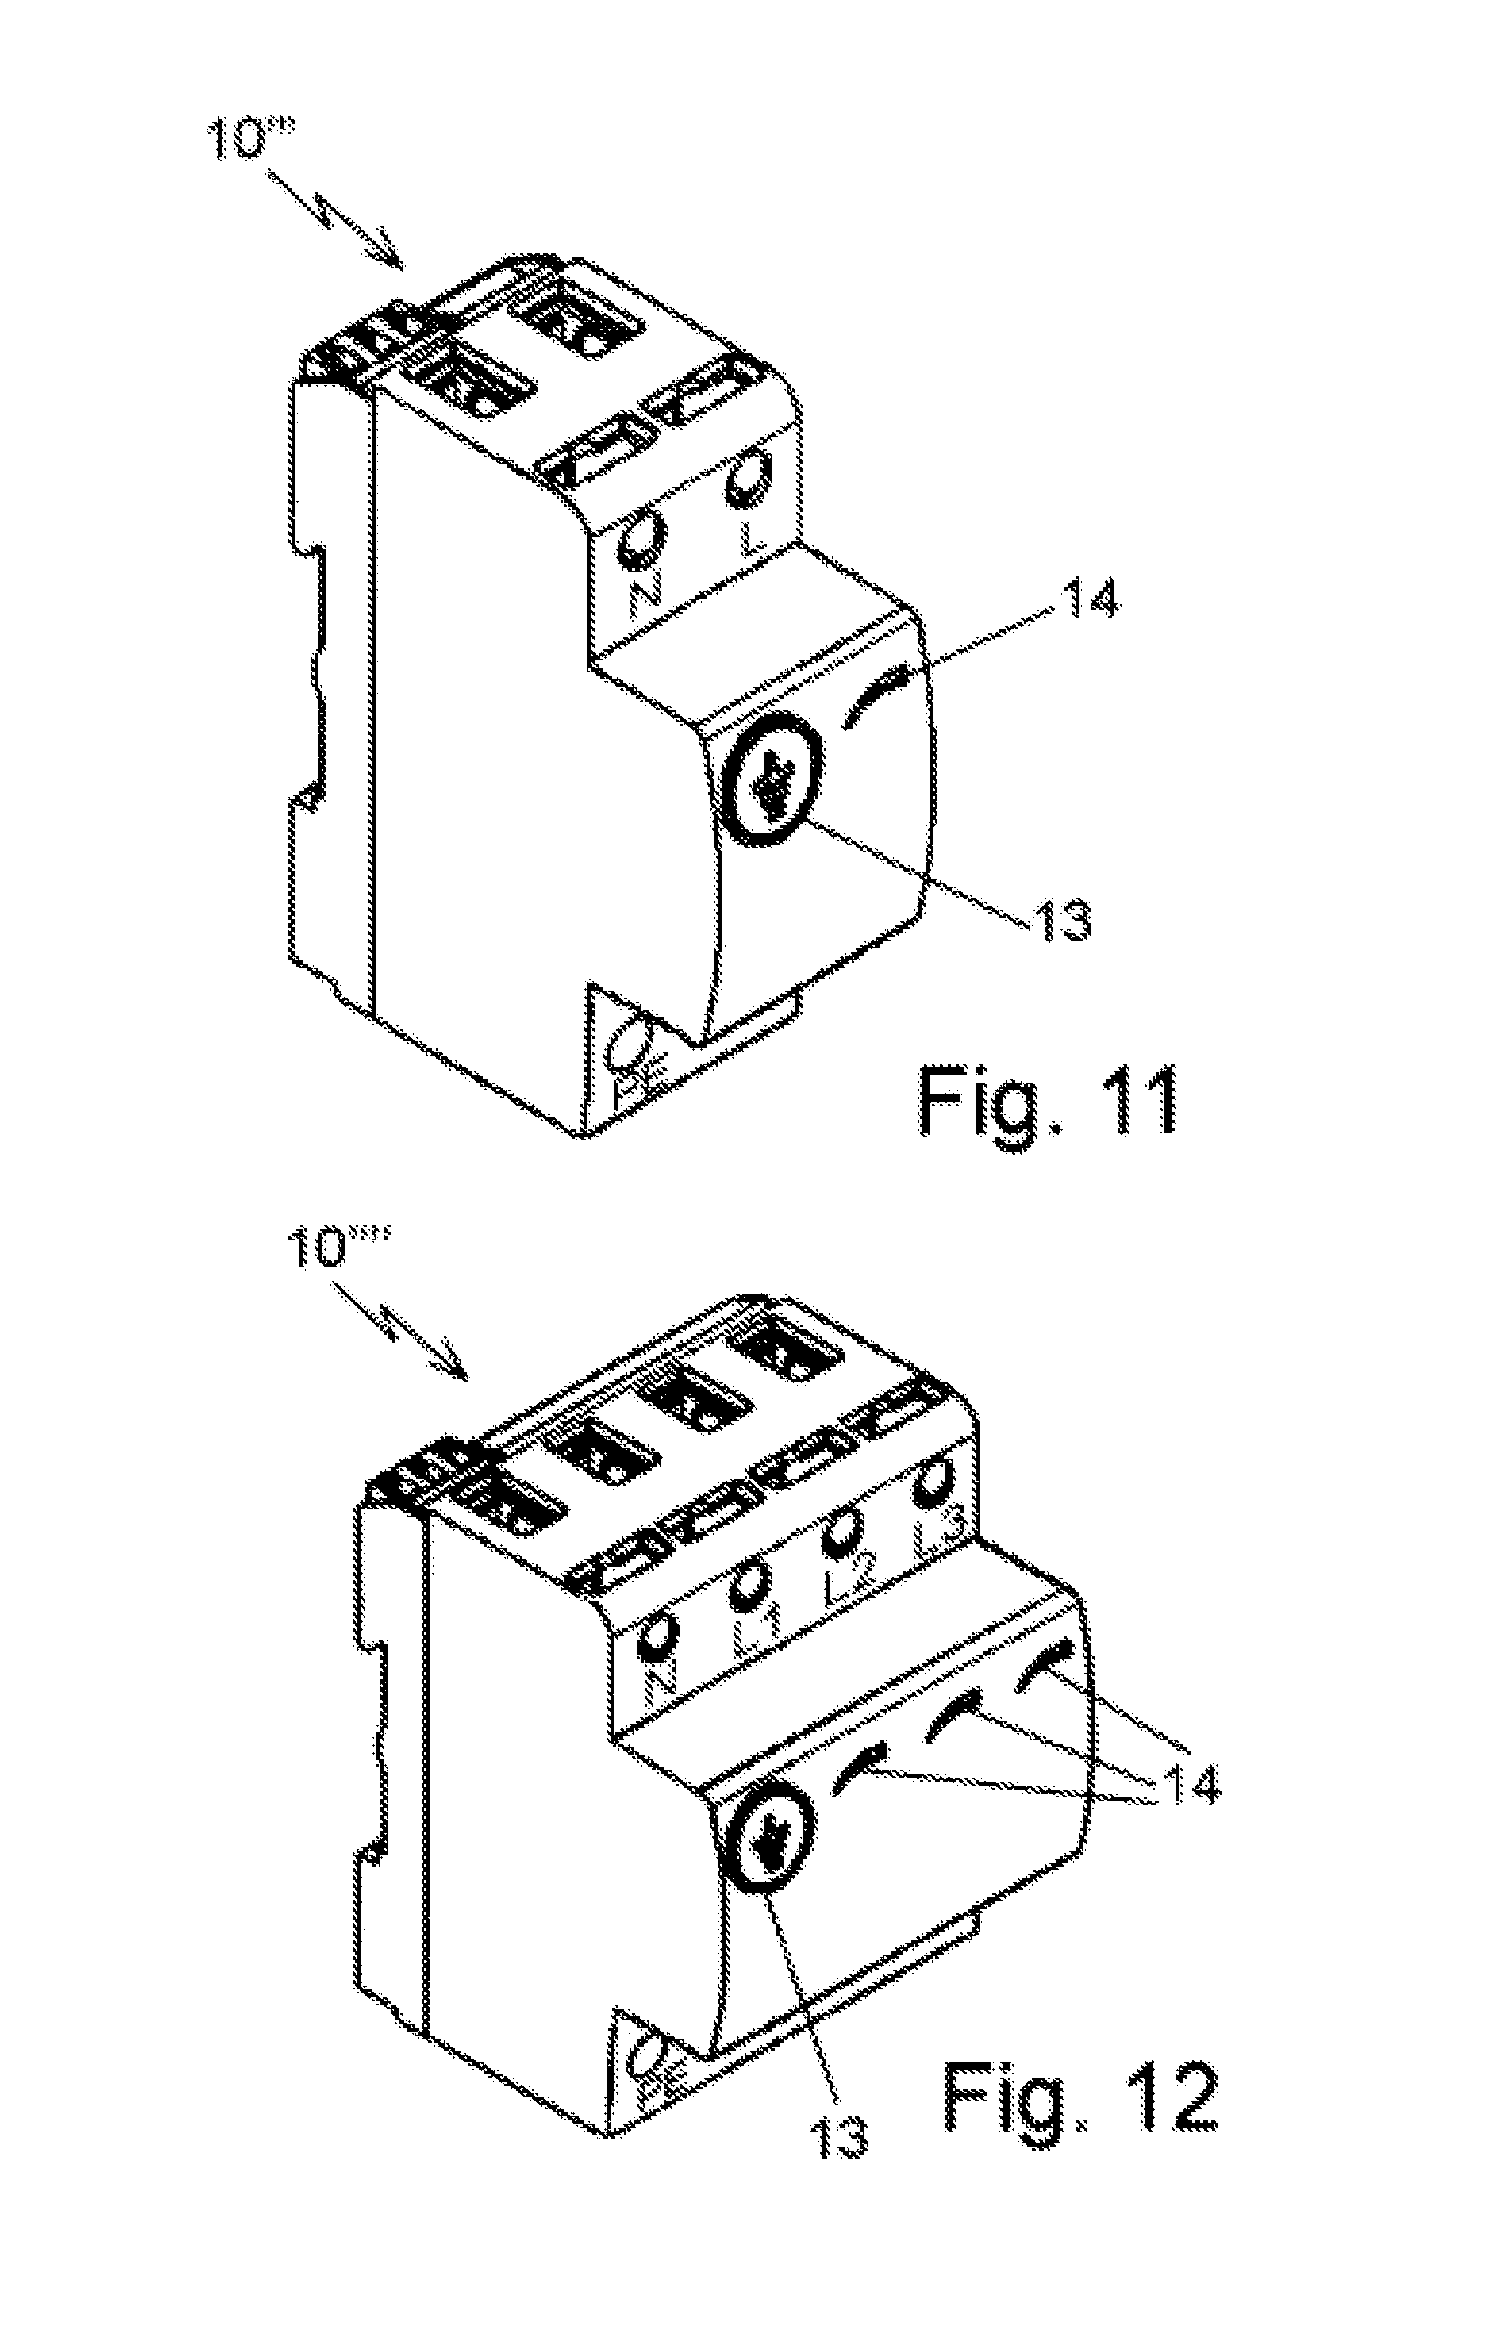 Combined device for electrical protection against transient overvoltages and monitoring of an electrical installation